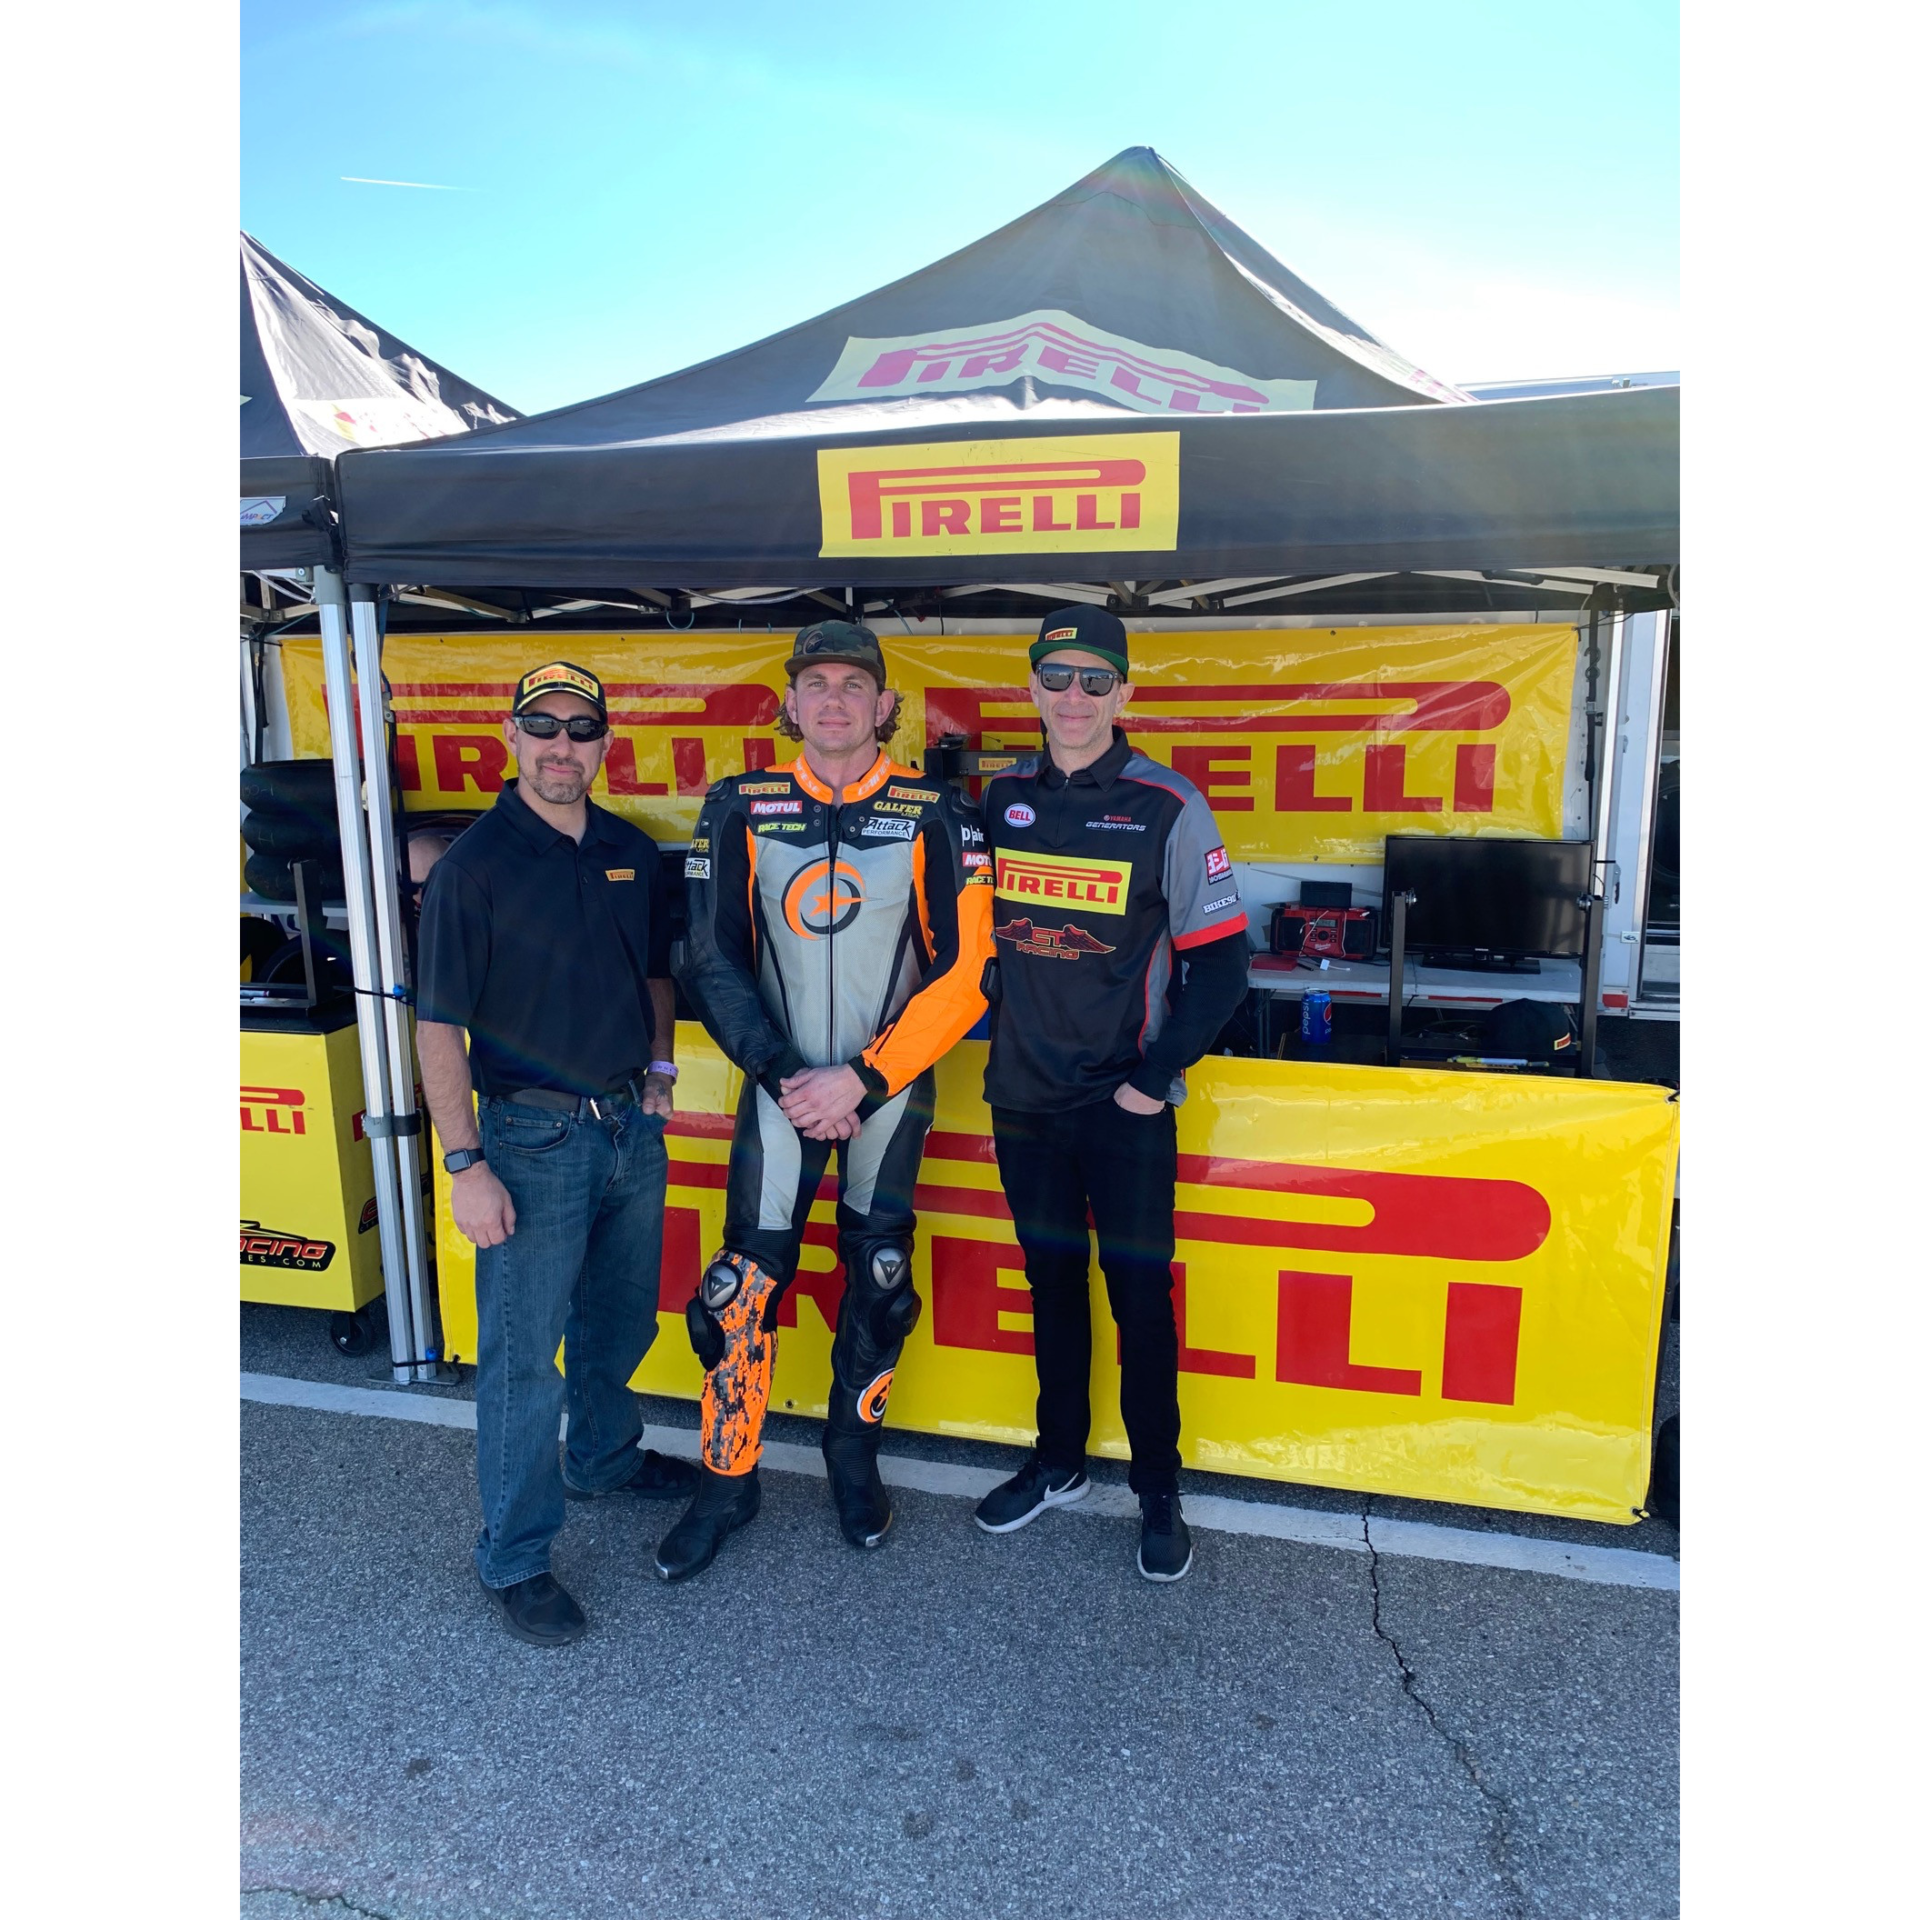 Pirelli Road Race Manage Oscar Solis (left), Moto Station’s Kory Cowan (center), and CT RACING owner Corey Neuer (right). Photo courtesy of CT Racing.